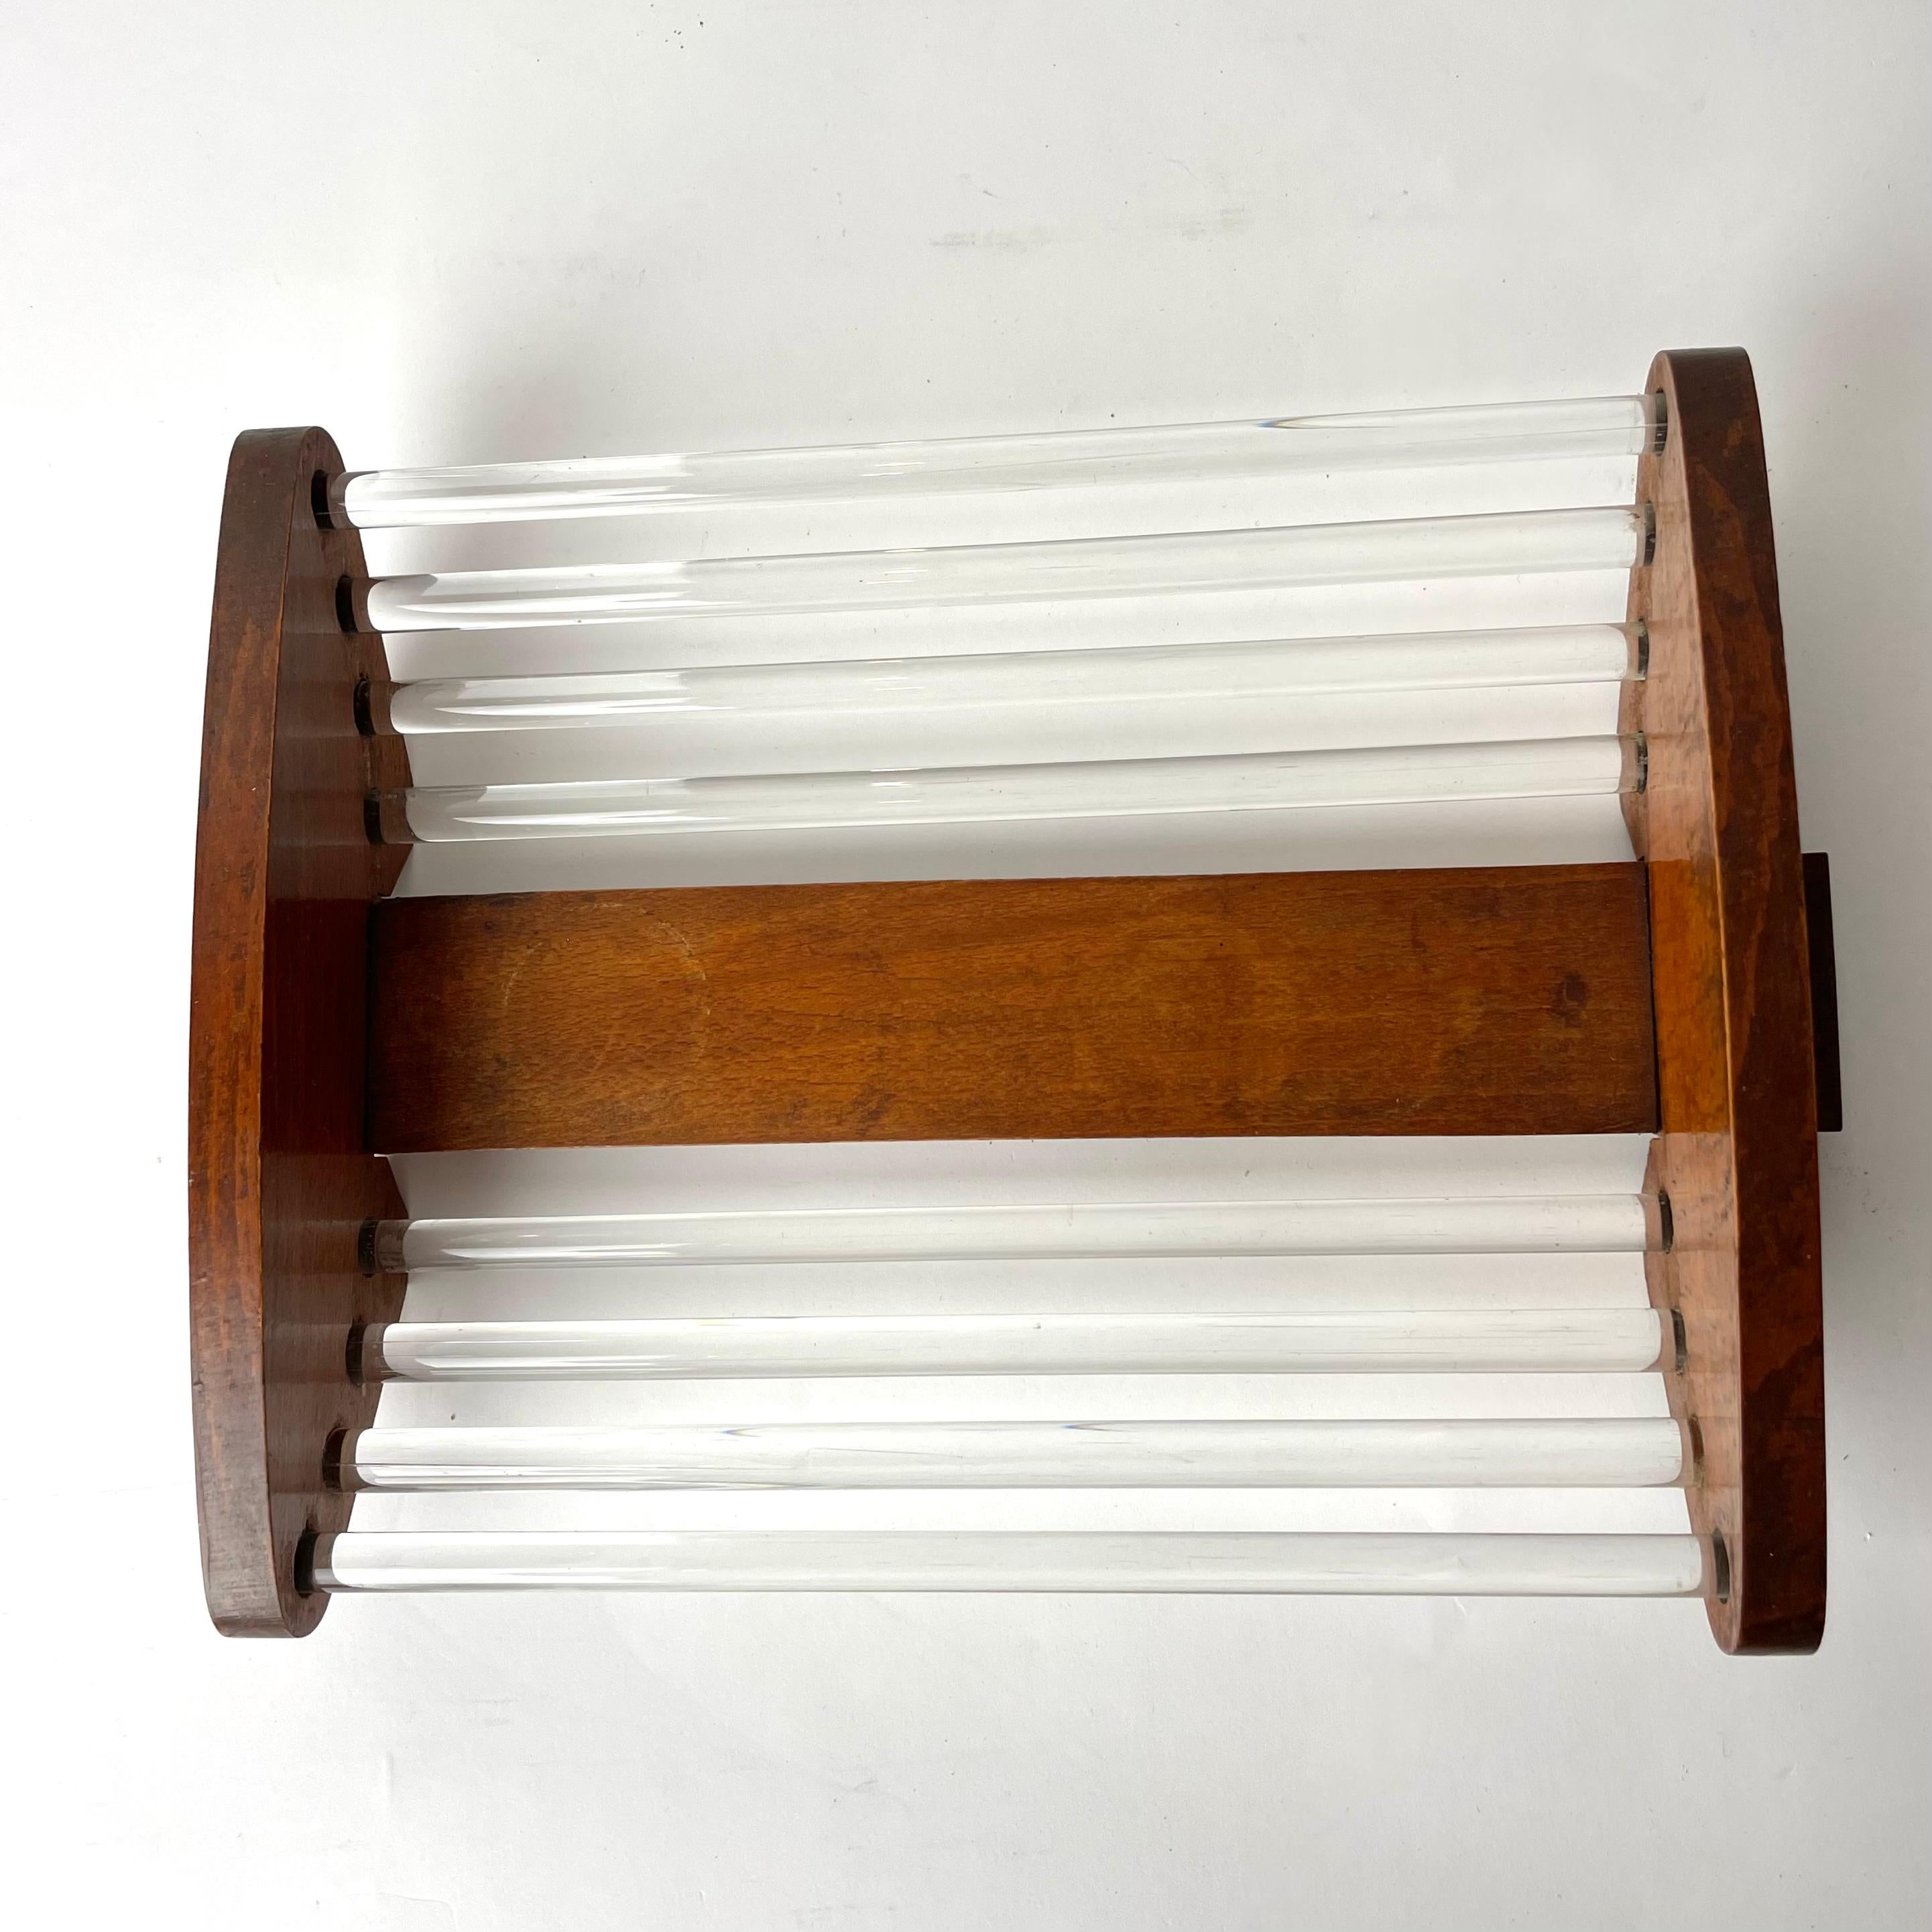 French Art Deco Fruit Platter, Beech Wood with Glass Rods, 1920s For Sale 1